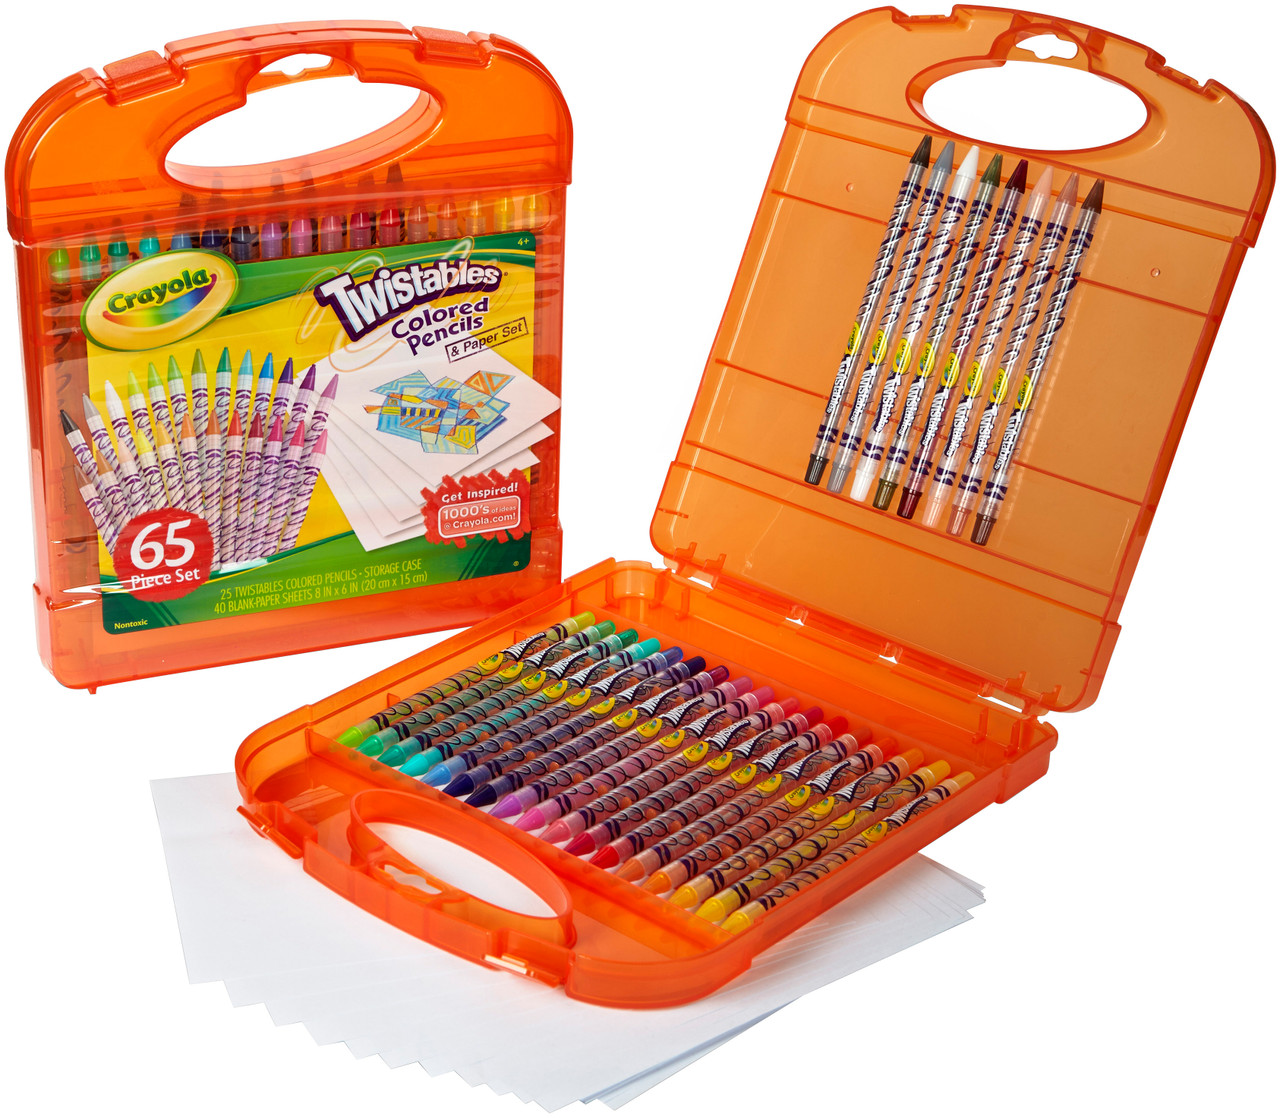  Crayola Silly Scents Twistables Colored Pencils, 12 Count, Ages  3 & Up (68-7402) : Toys & Games